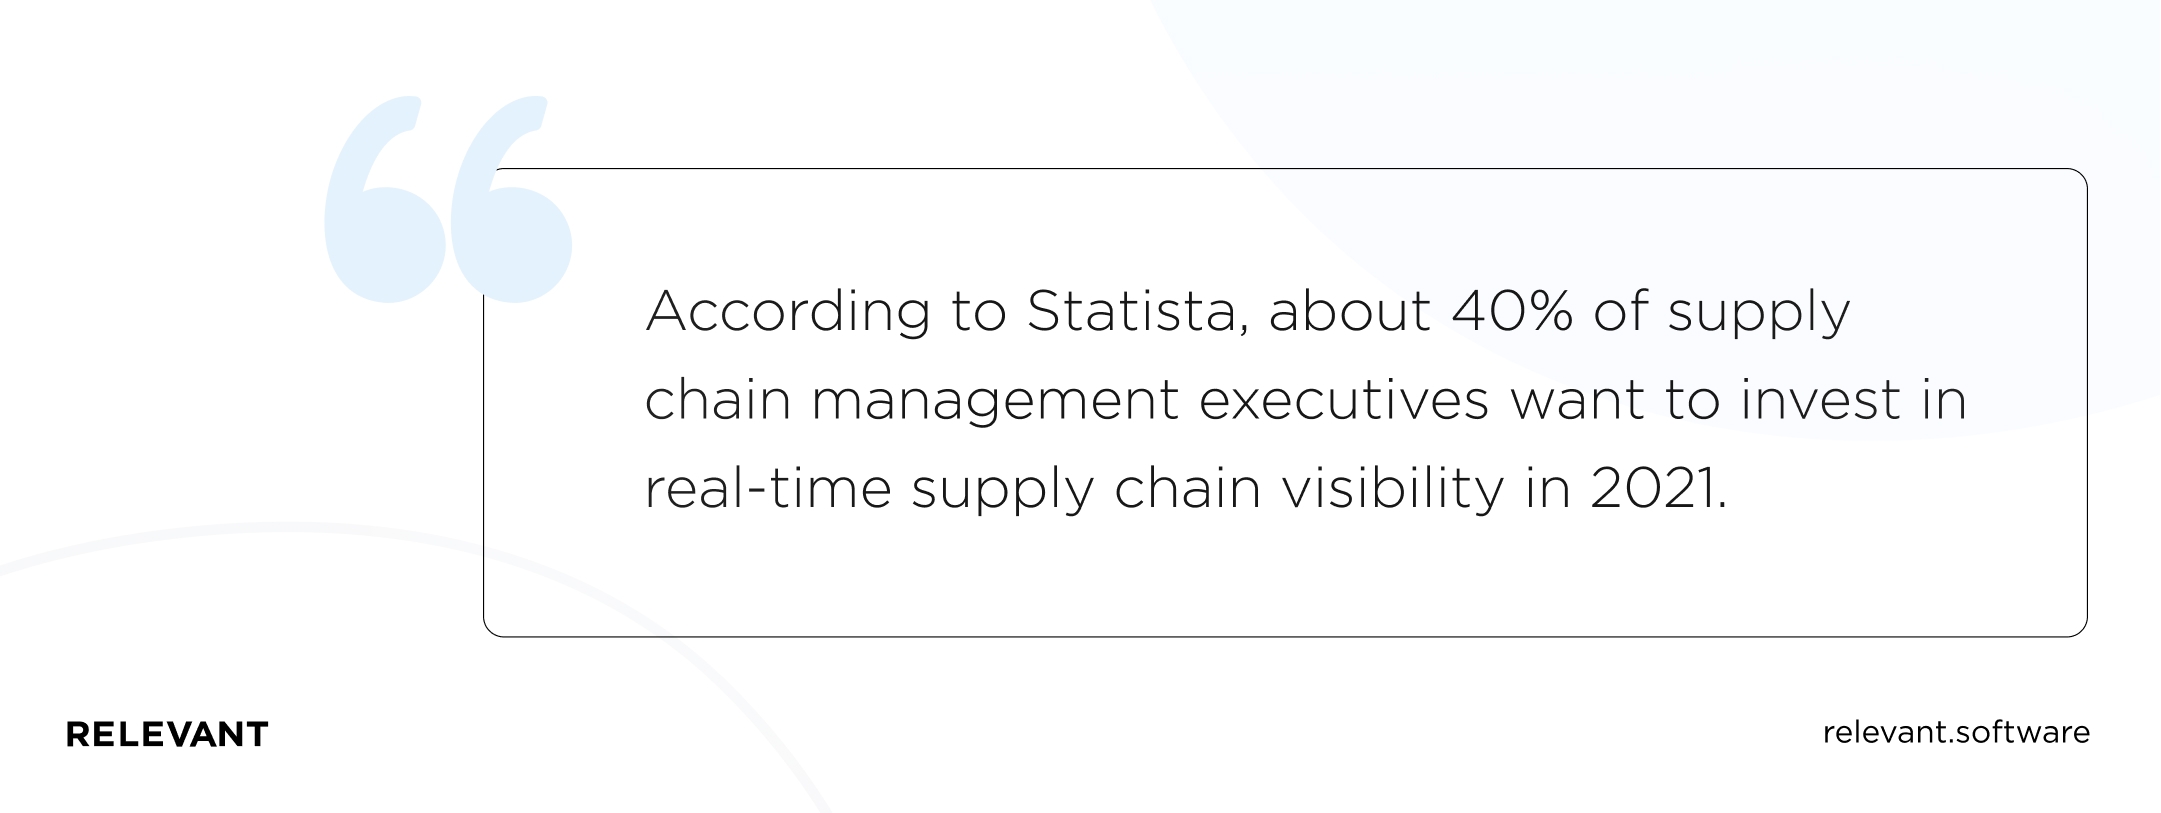 According to Statista, about 40% of supply chain management executives want to invest in real-time supply chain visibility in 2021.